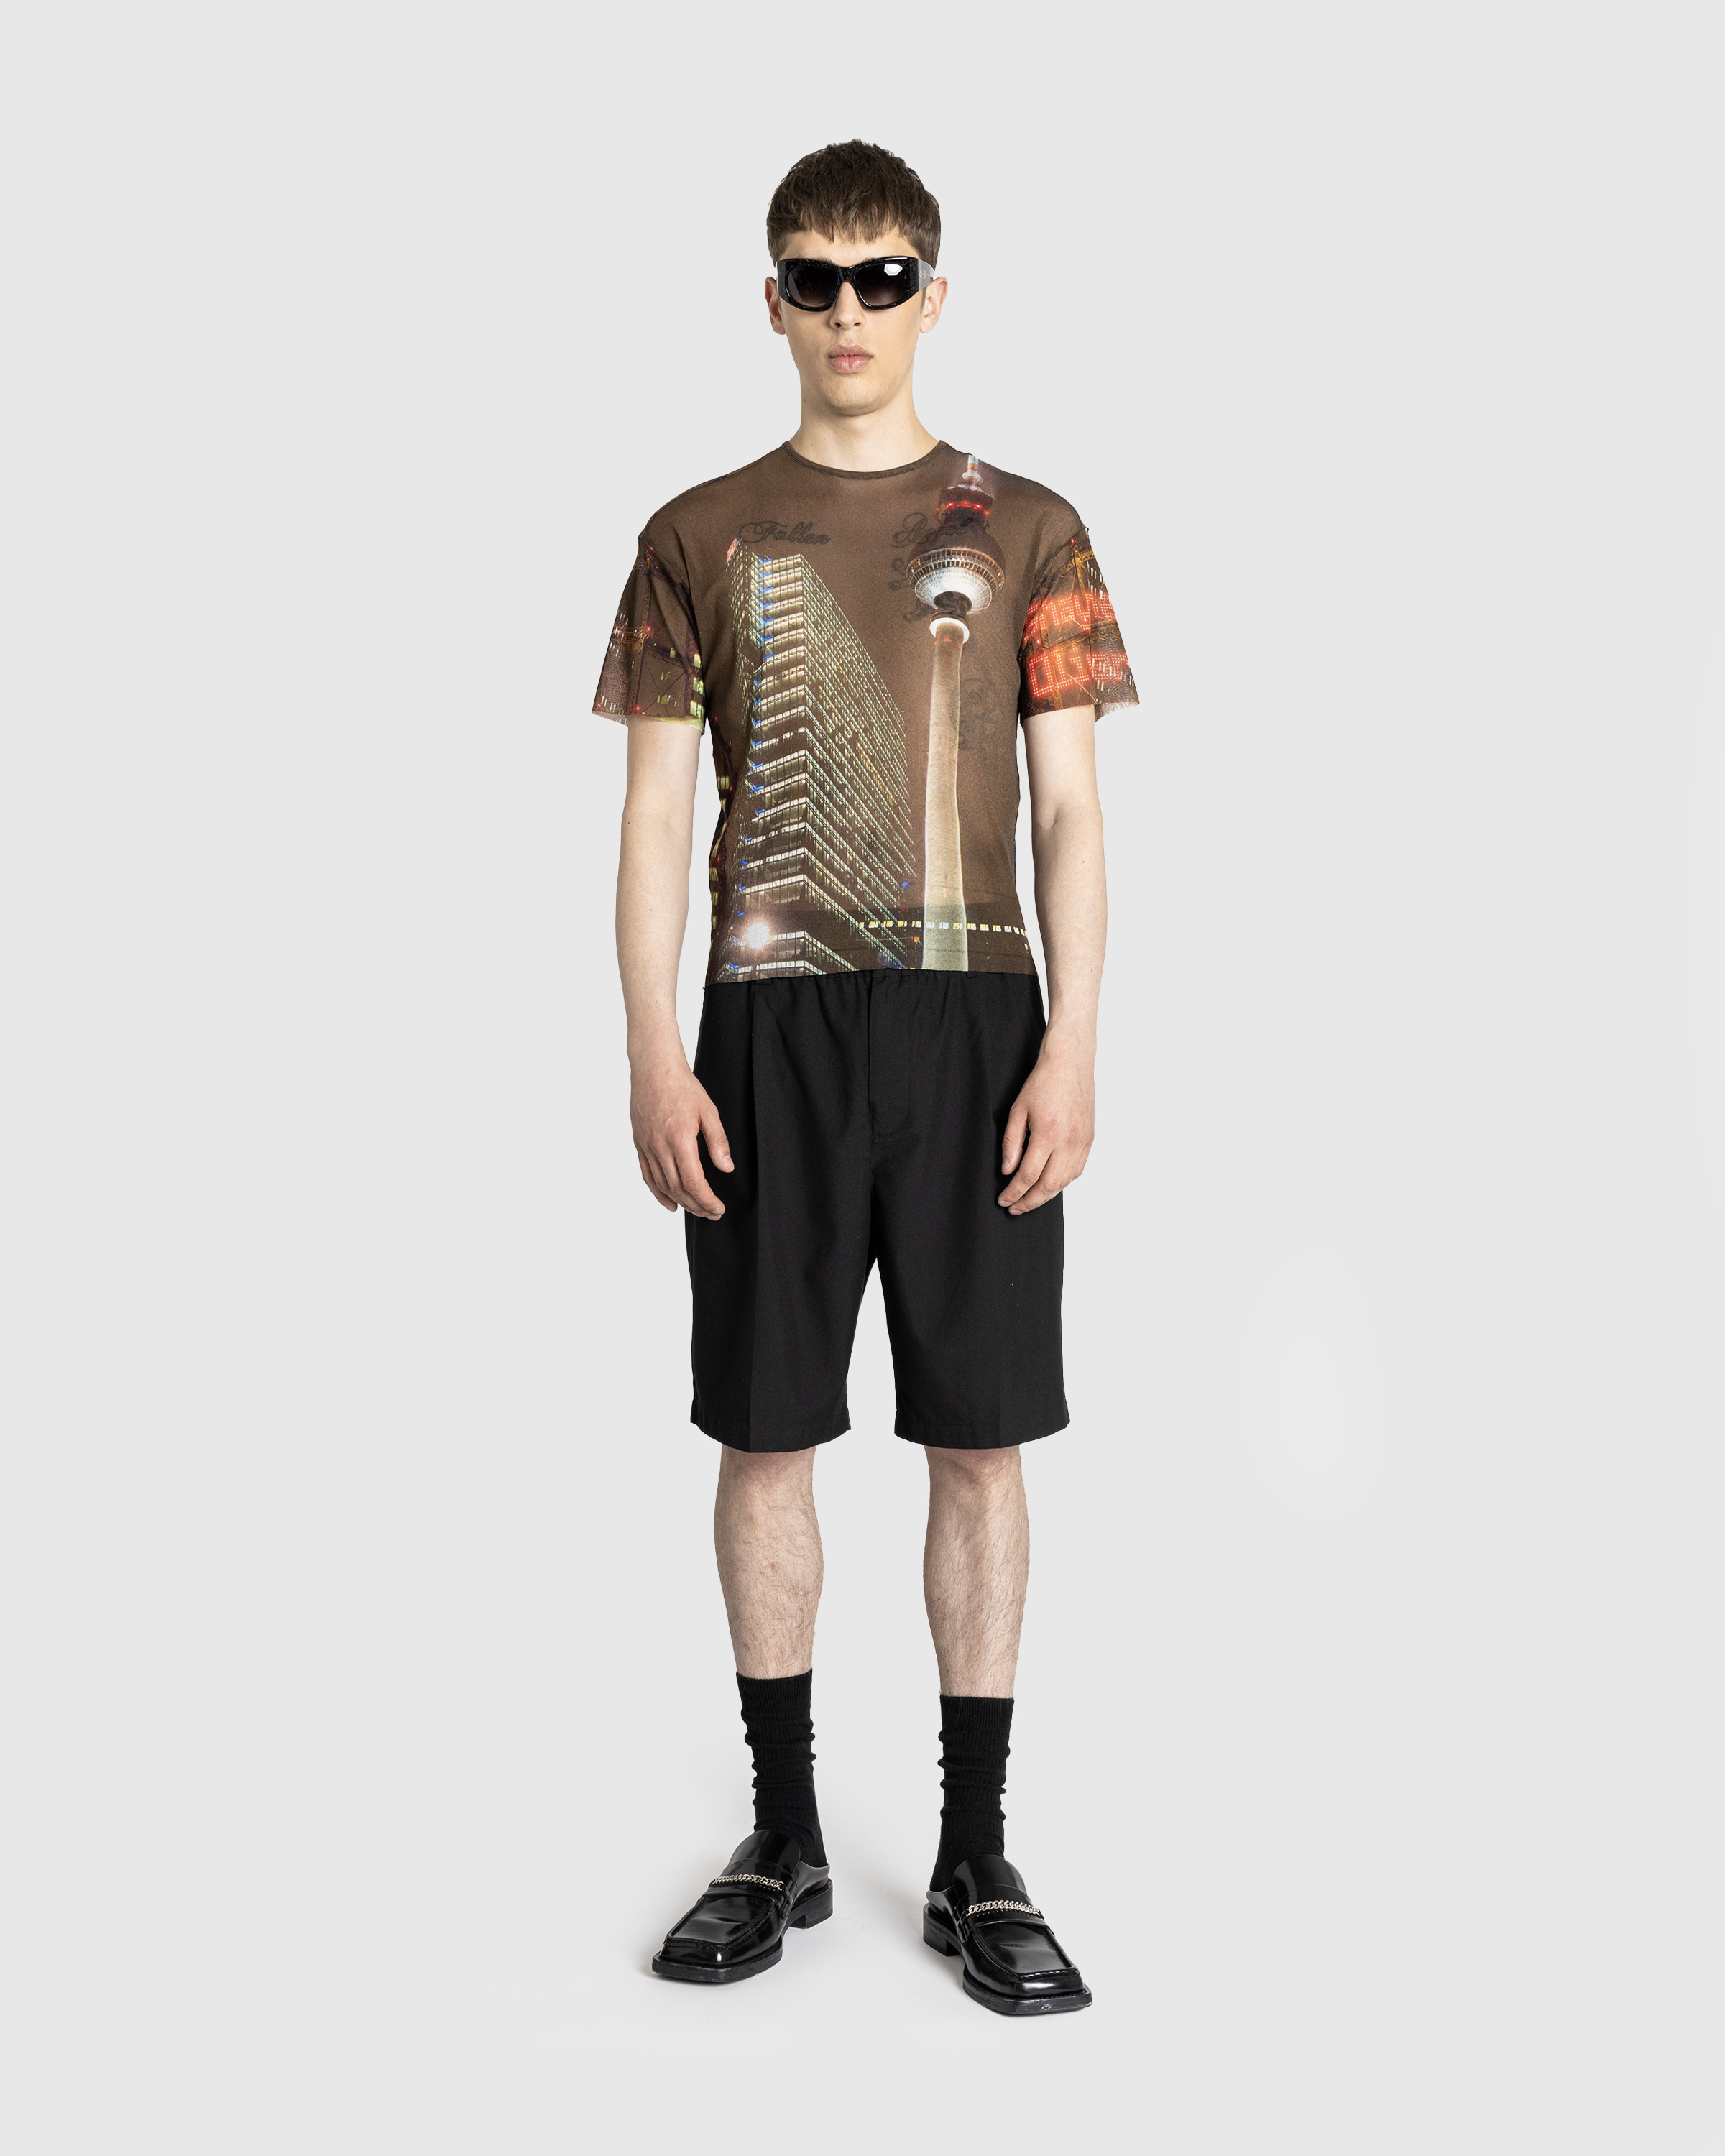 Jean Paul Gaultier x Shayne Oliver – Mesh Oversized Tee Printed "City" Brown/Green/Blue/Red - T-Shirts - Brown - Image 3